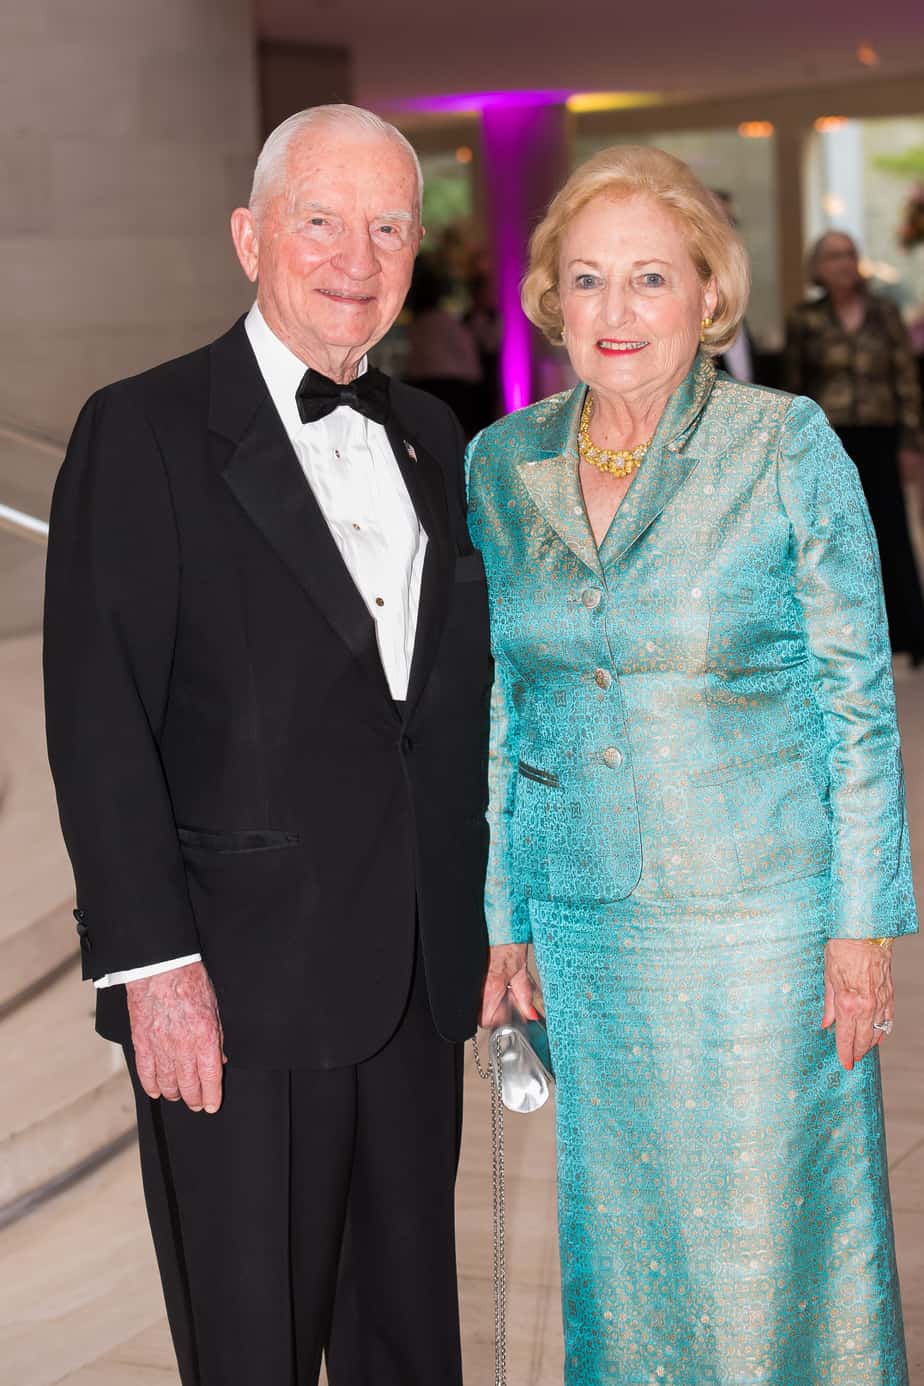 Margot Birmingham Perot 5 facts About Ross Perot's Wife